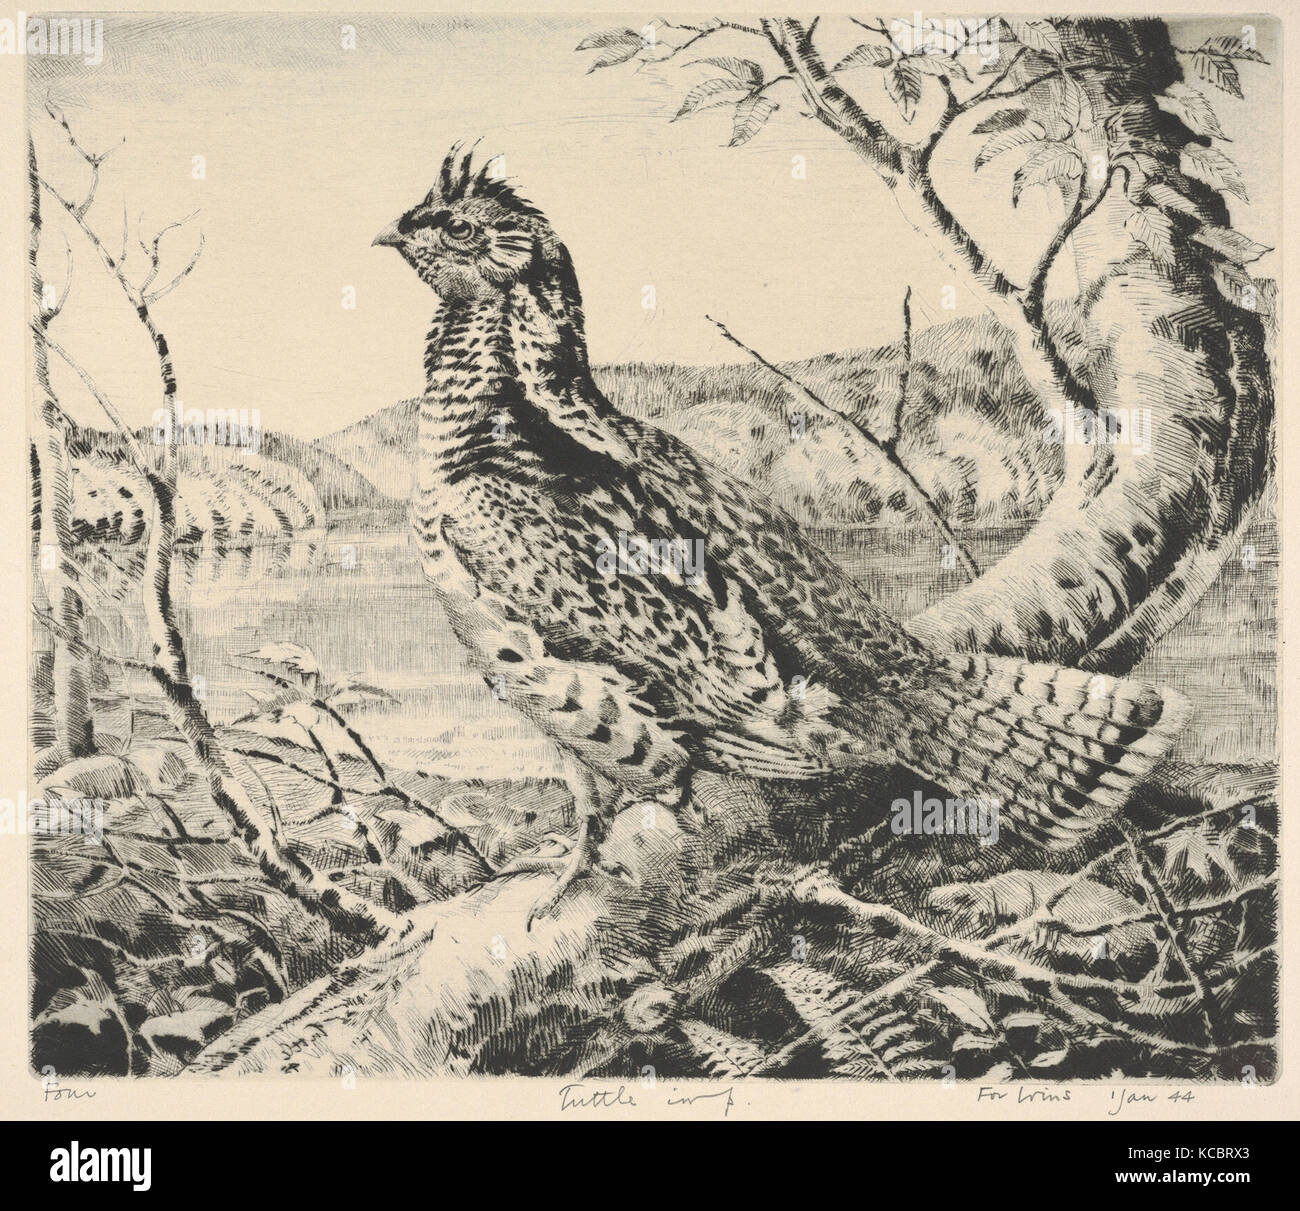 Ruffled Grouse, 1943–44, Drypoint, plate: 9 1/4 x 10 7/8 in. (23.5 x 27.6 cm), Prints, Henry Emerson Tuttle (American Stock Photo